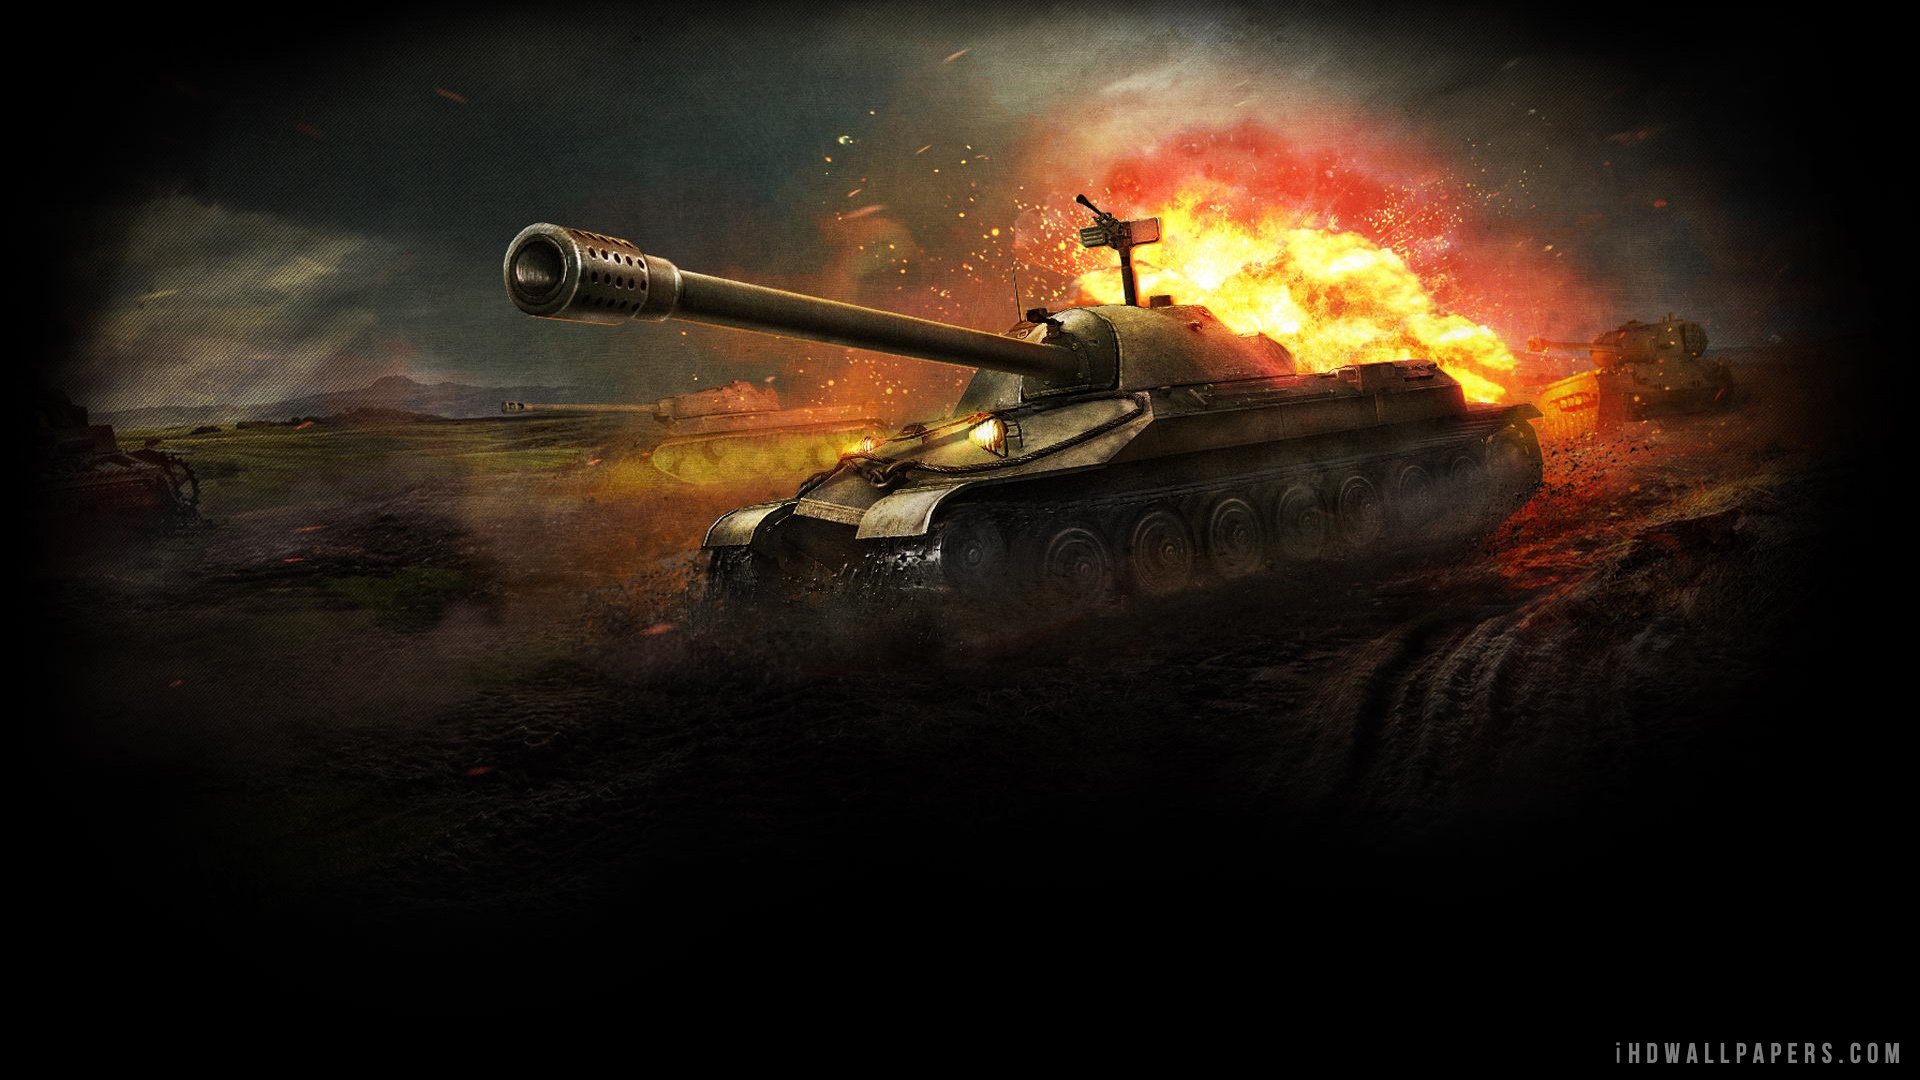  Download World Of Tanks 4 WallpaperBackground in 1920x1080